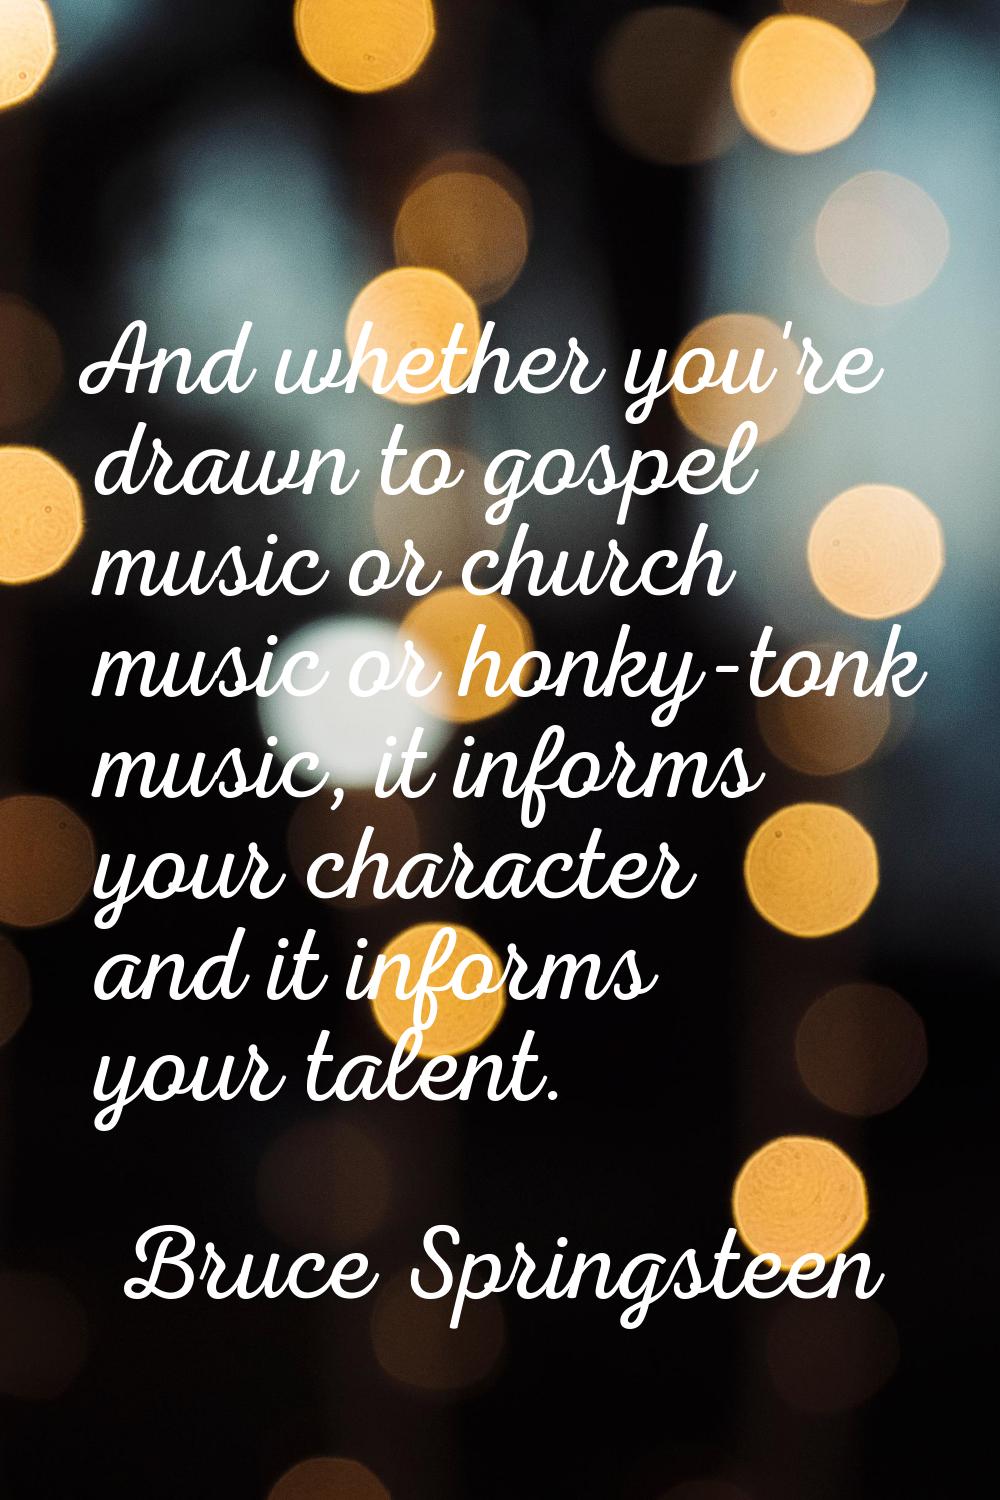 And whether you're drawn to gospel music or church music or honky-tonk music, it informs your chara